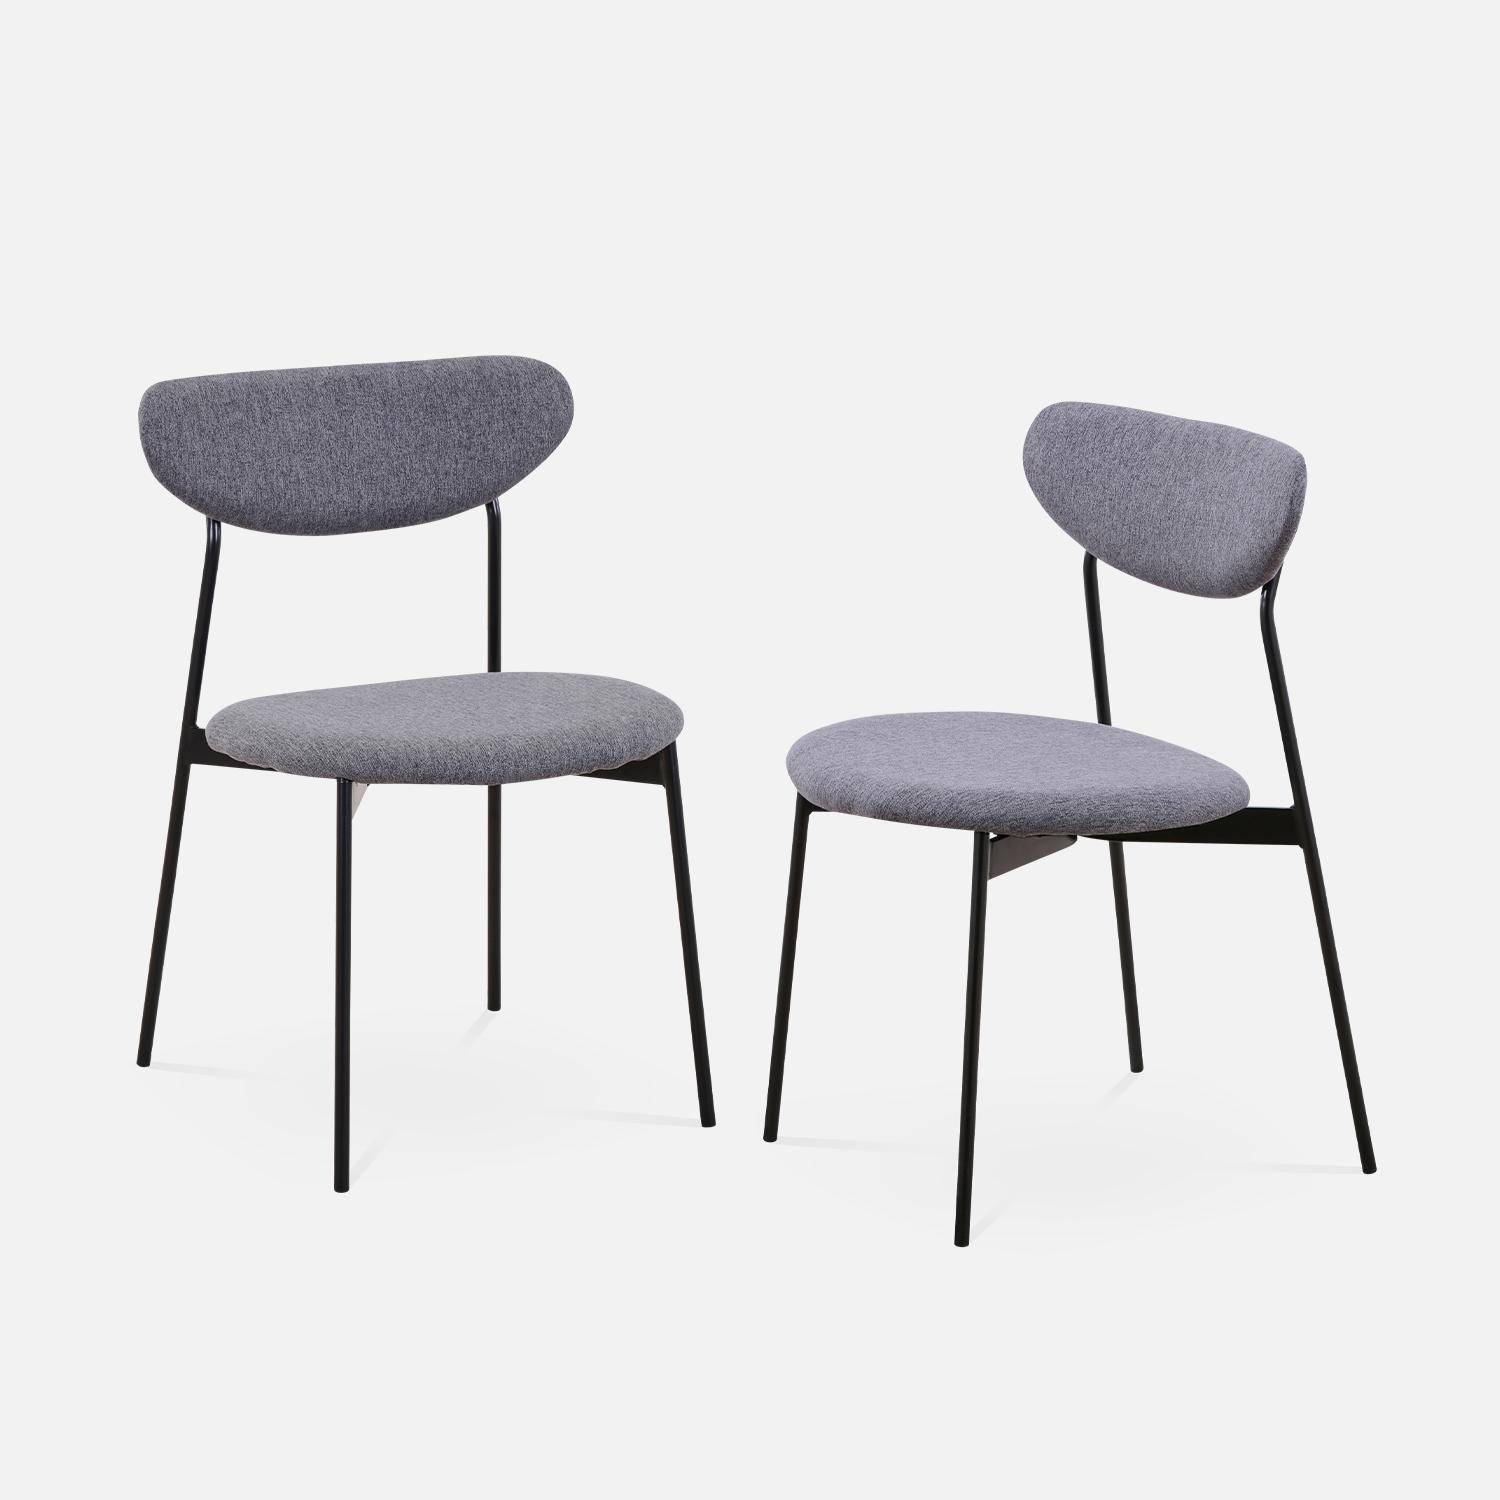 Set of 2 retro style dining chairs with steel legs - Arty - Dark Grey Photo3